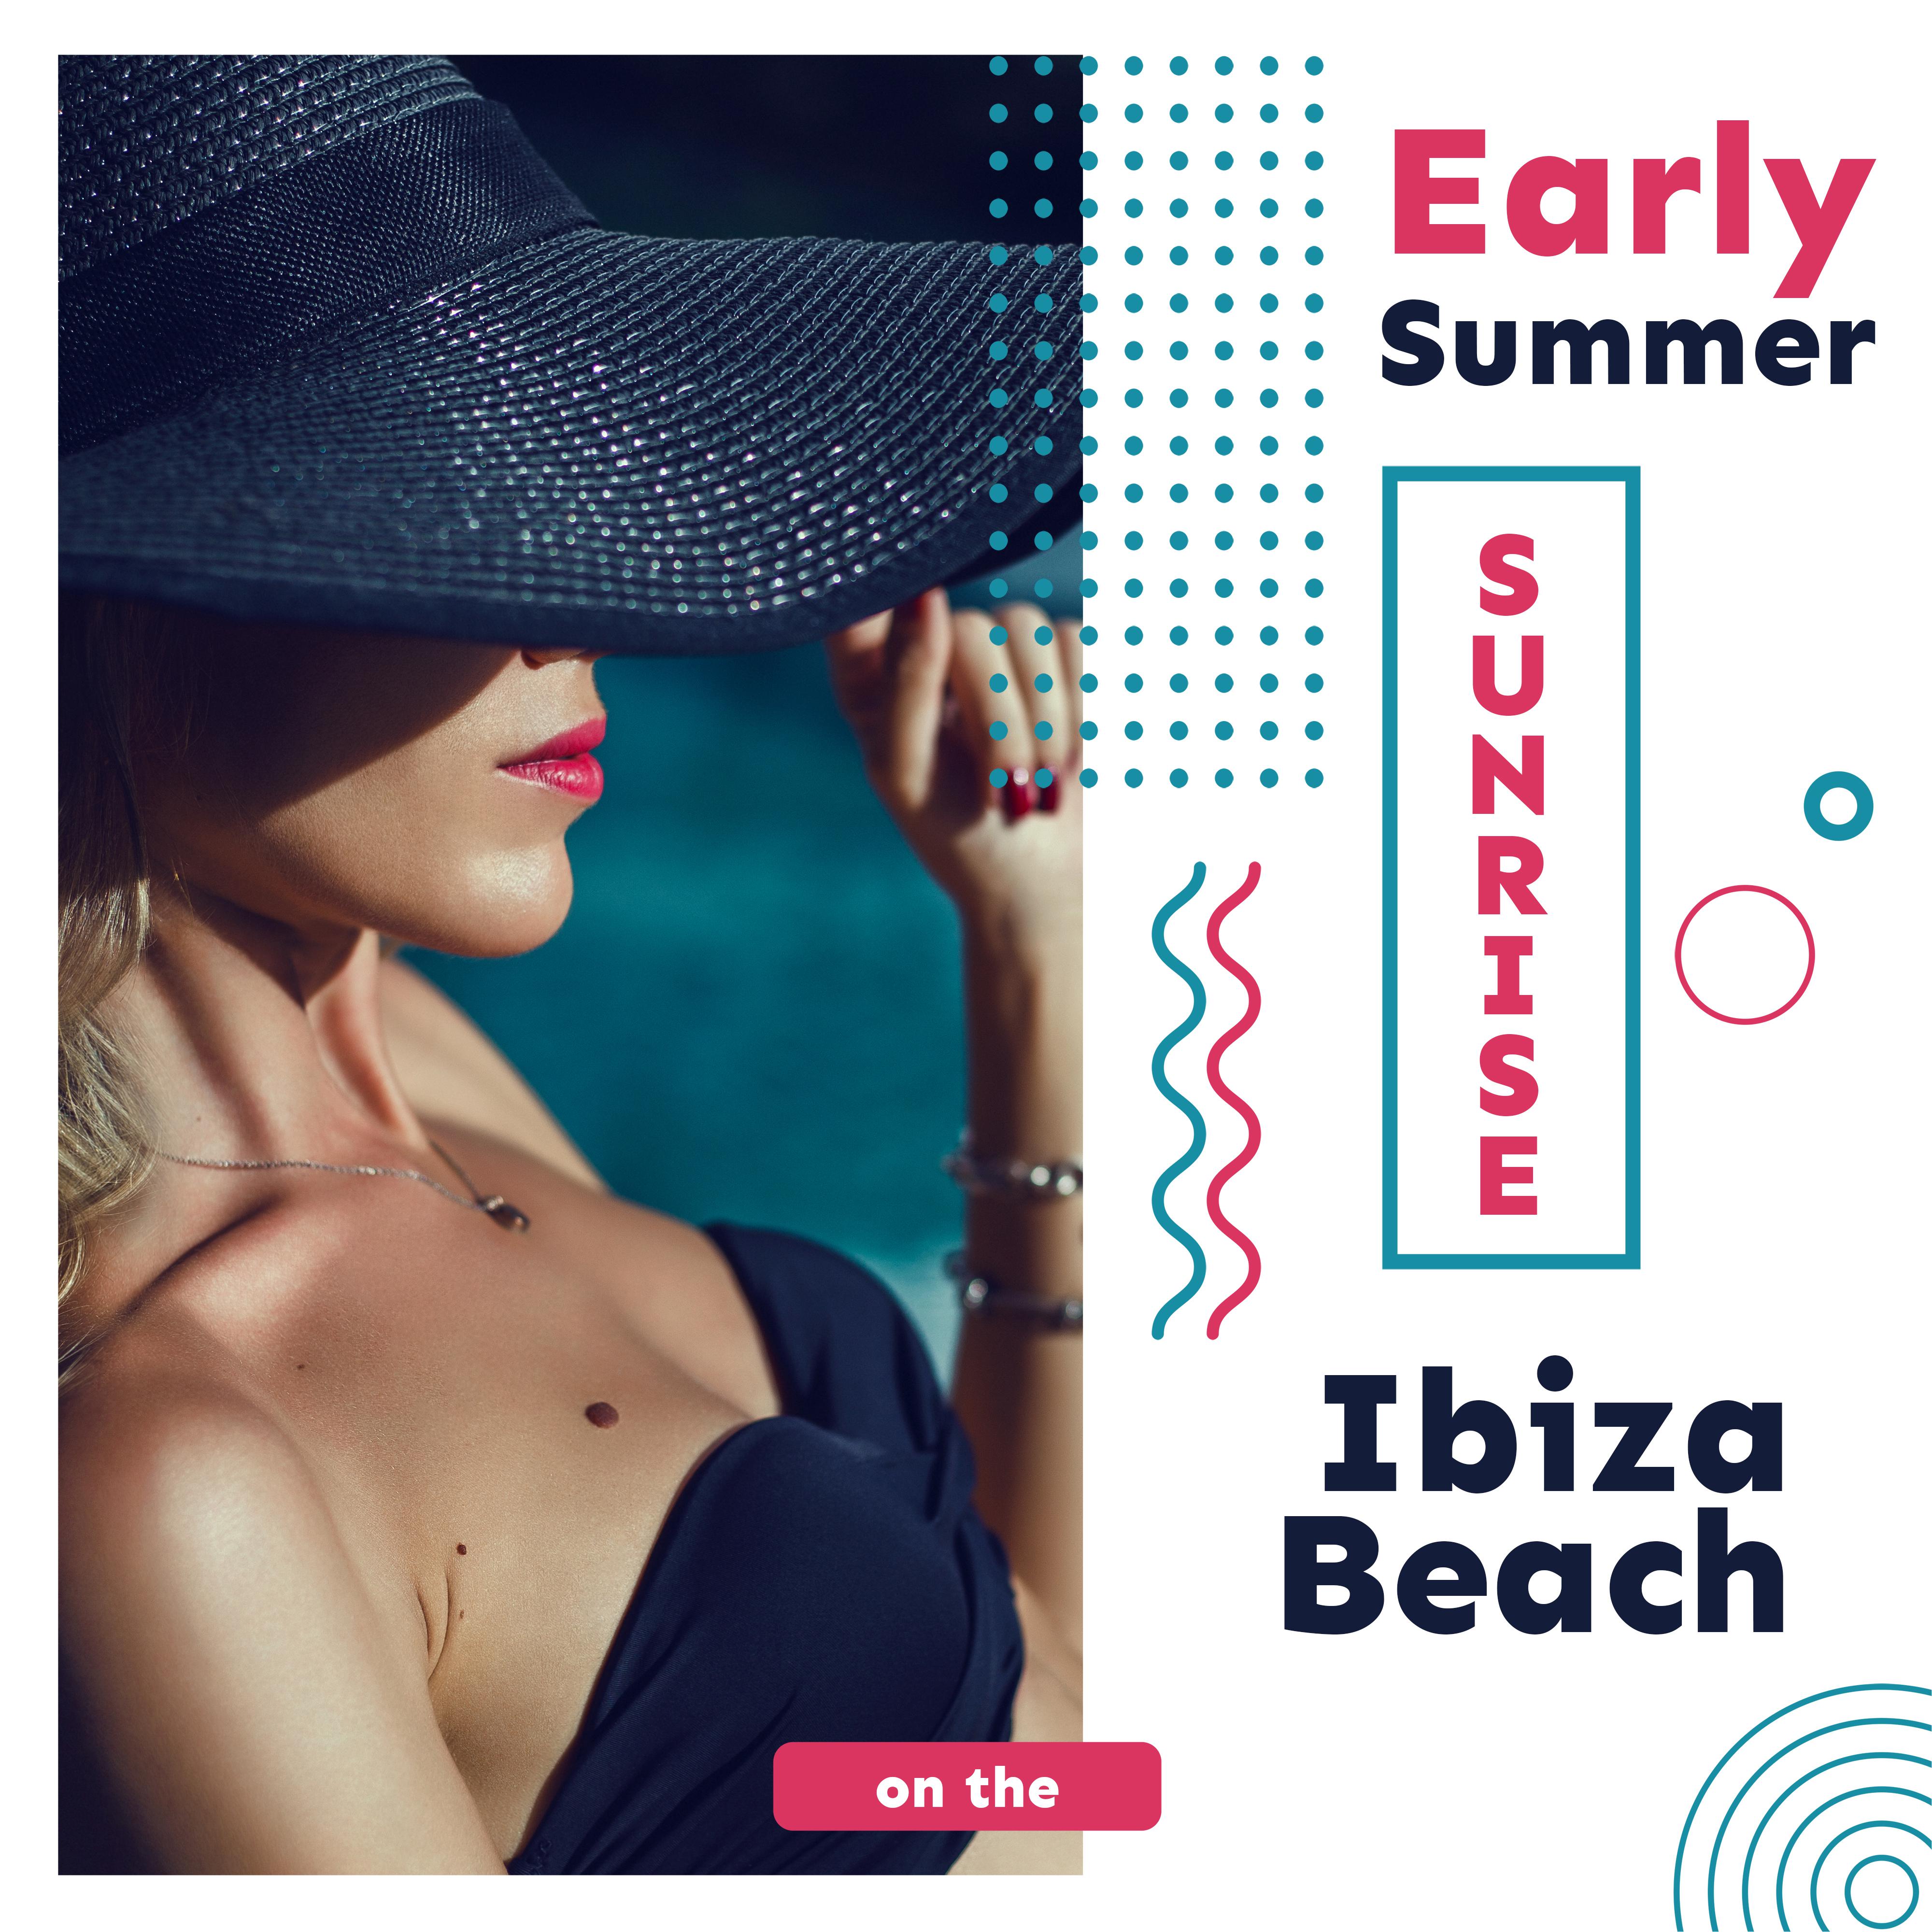 Early Summer Sunrise on the Ibiza Beach: 2019 Fresh Chillout Holiday Relaxation Music Mix, Deep Ambient Songs with Slow Beats, Tropical Vacation Perfect Background for Calm & Rest on the Beach